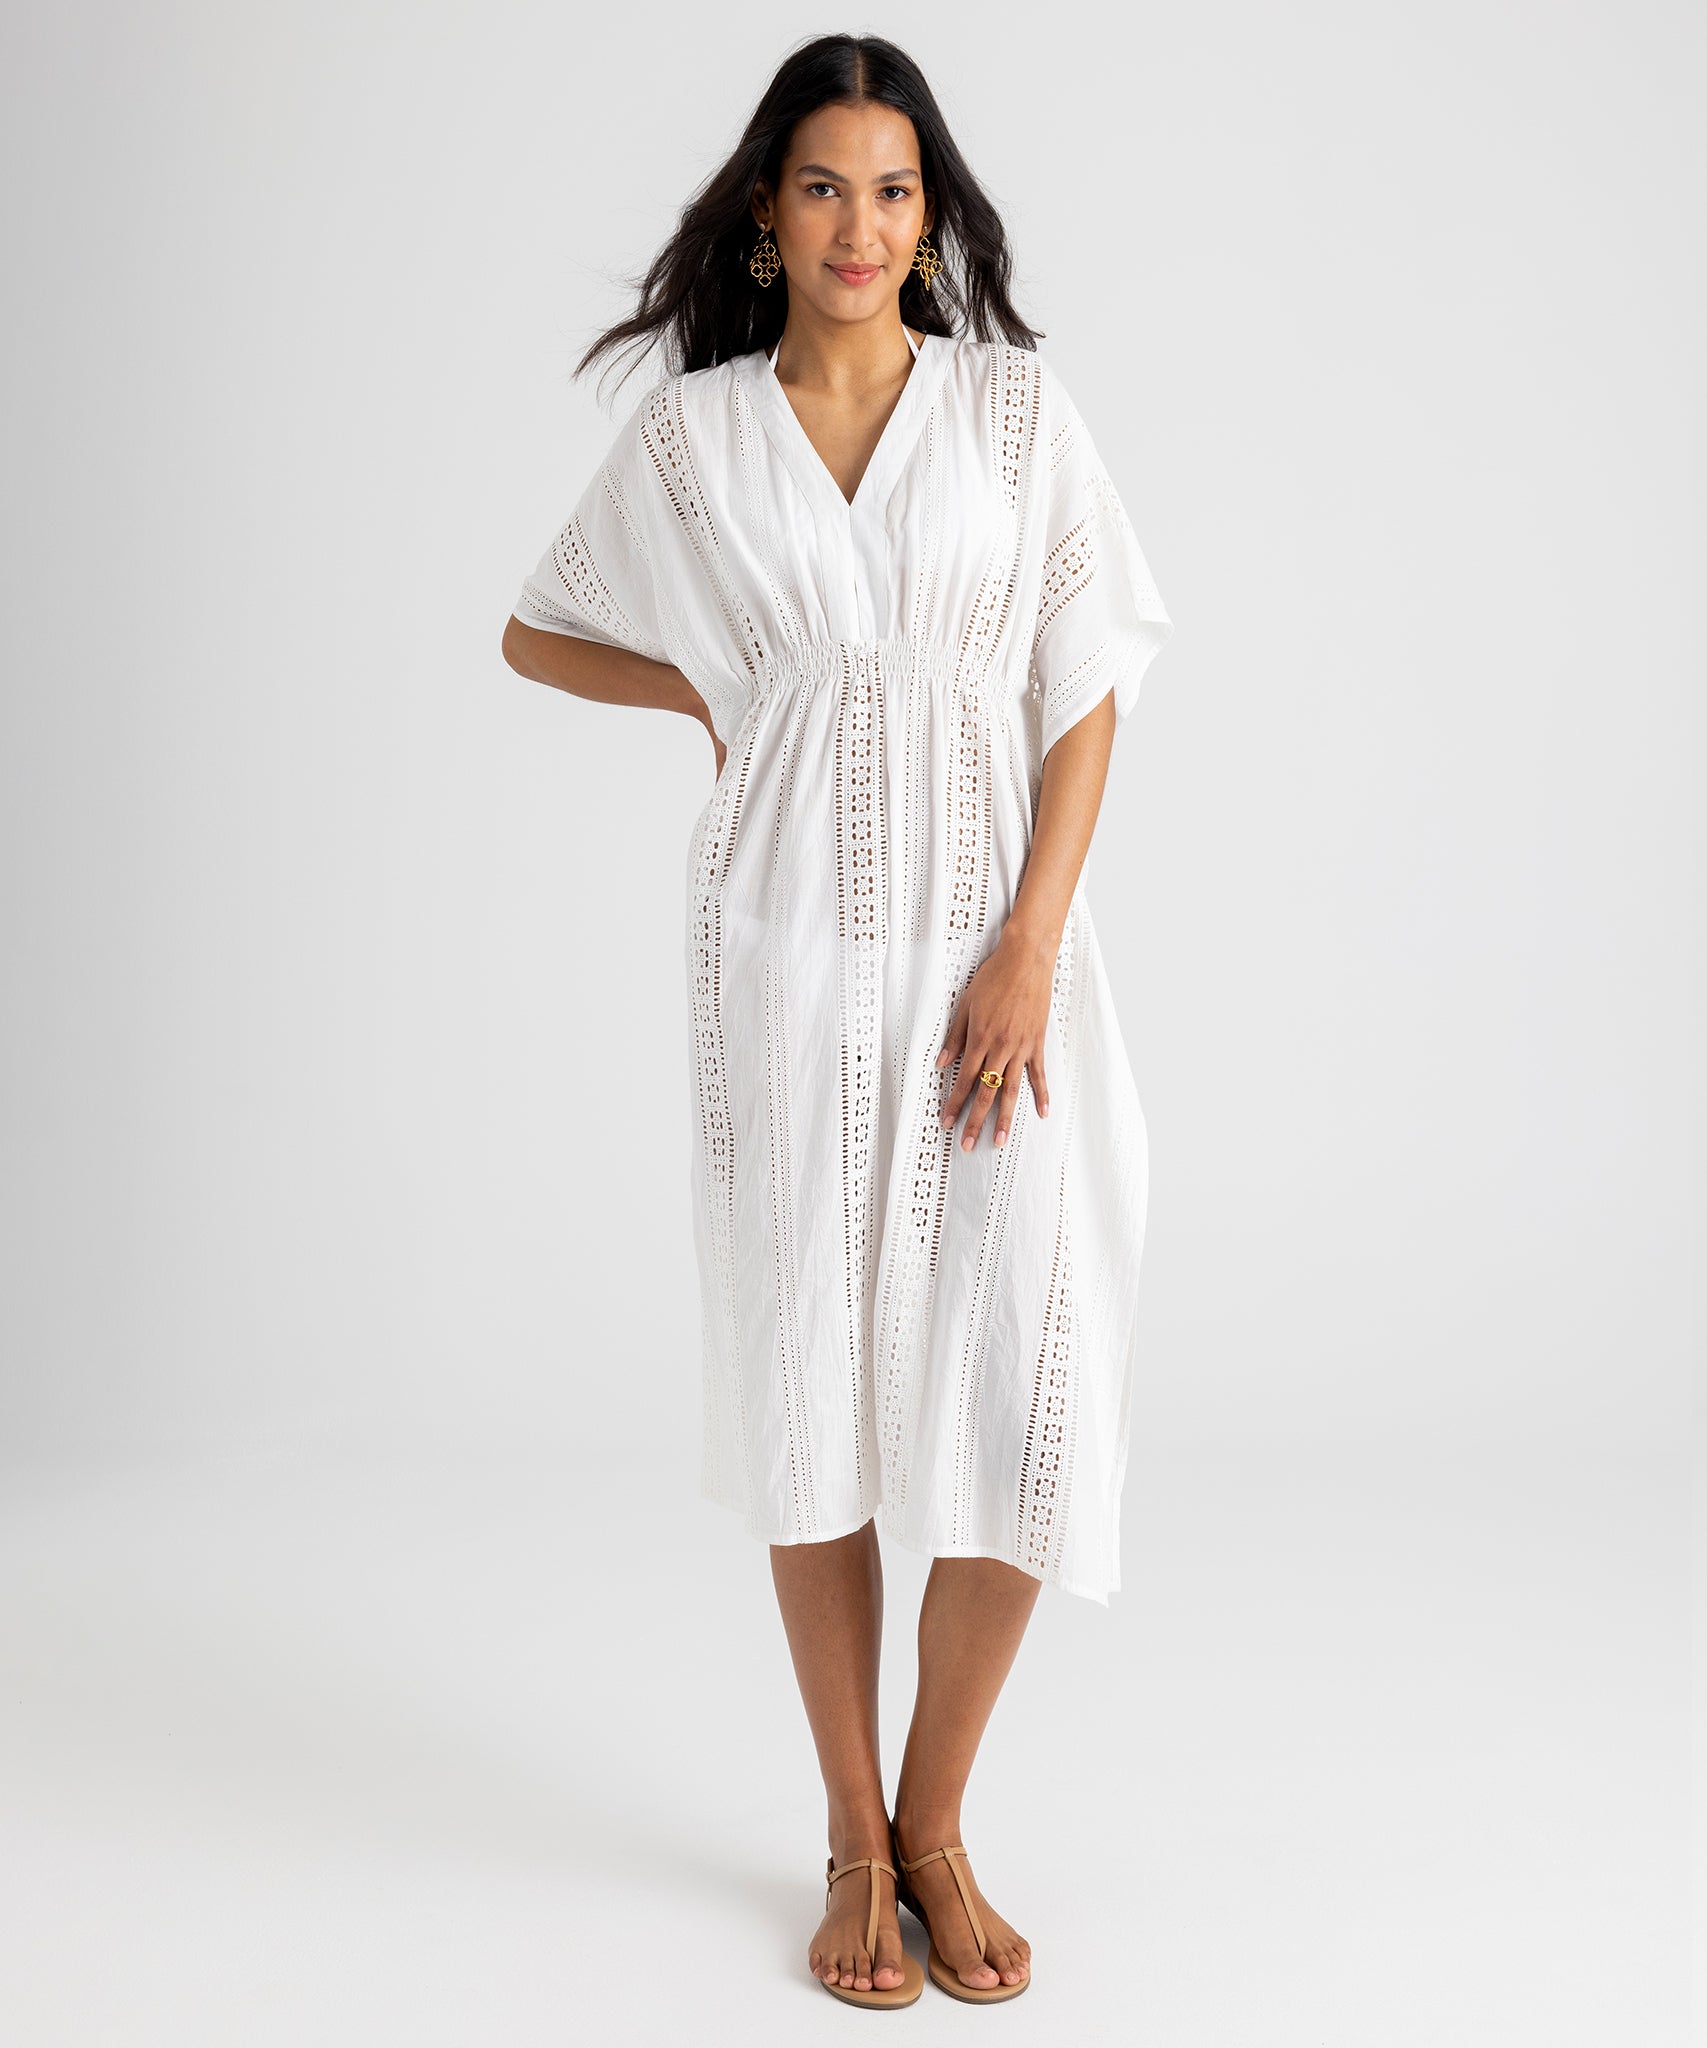 Eyelet Maxi Caftan in color White on model